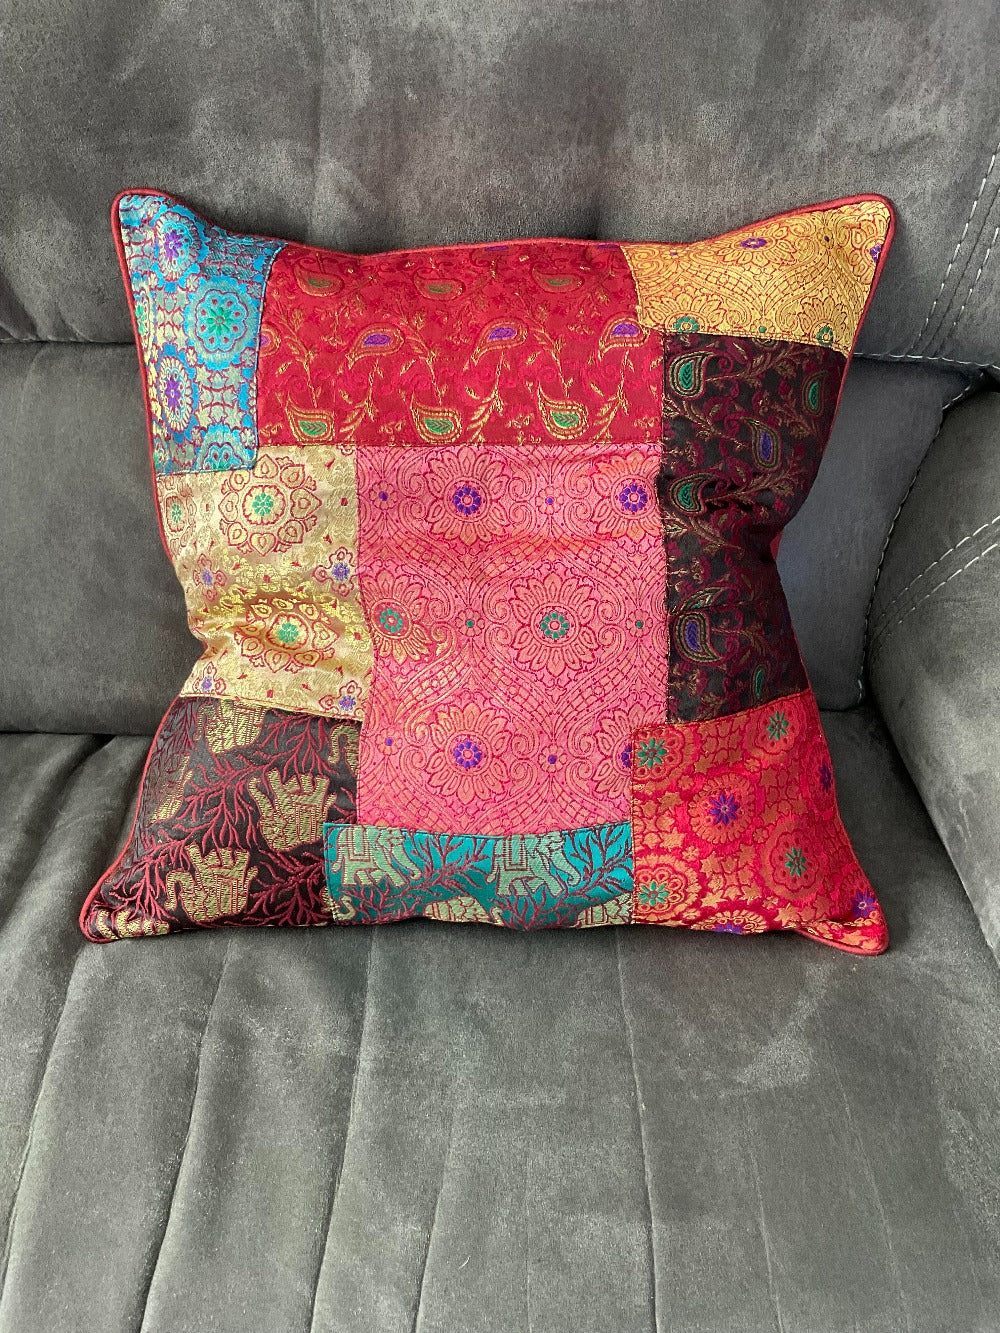 Cushion Cover made with Recycled Sari and Brocade Patchwork